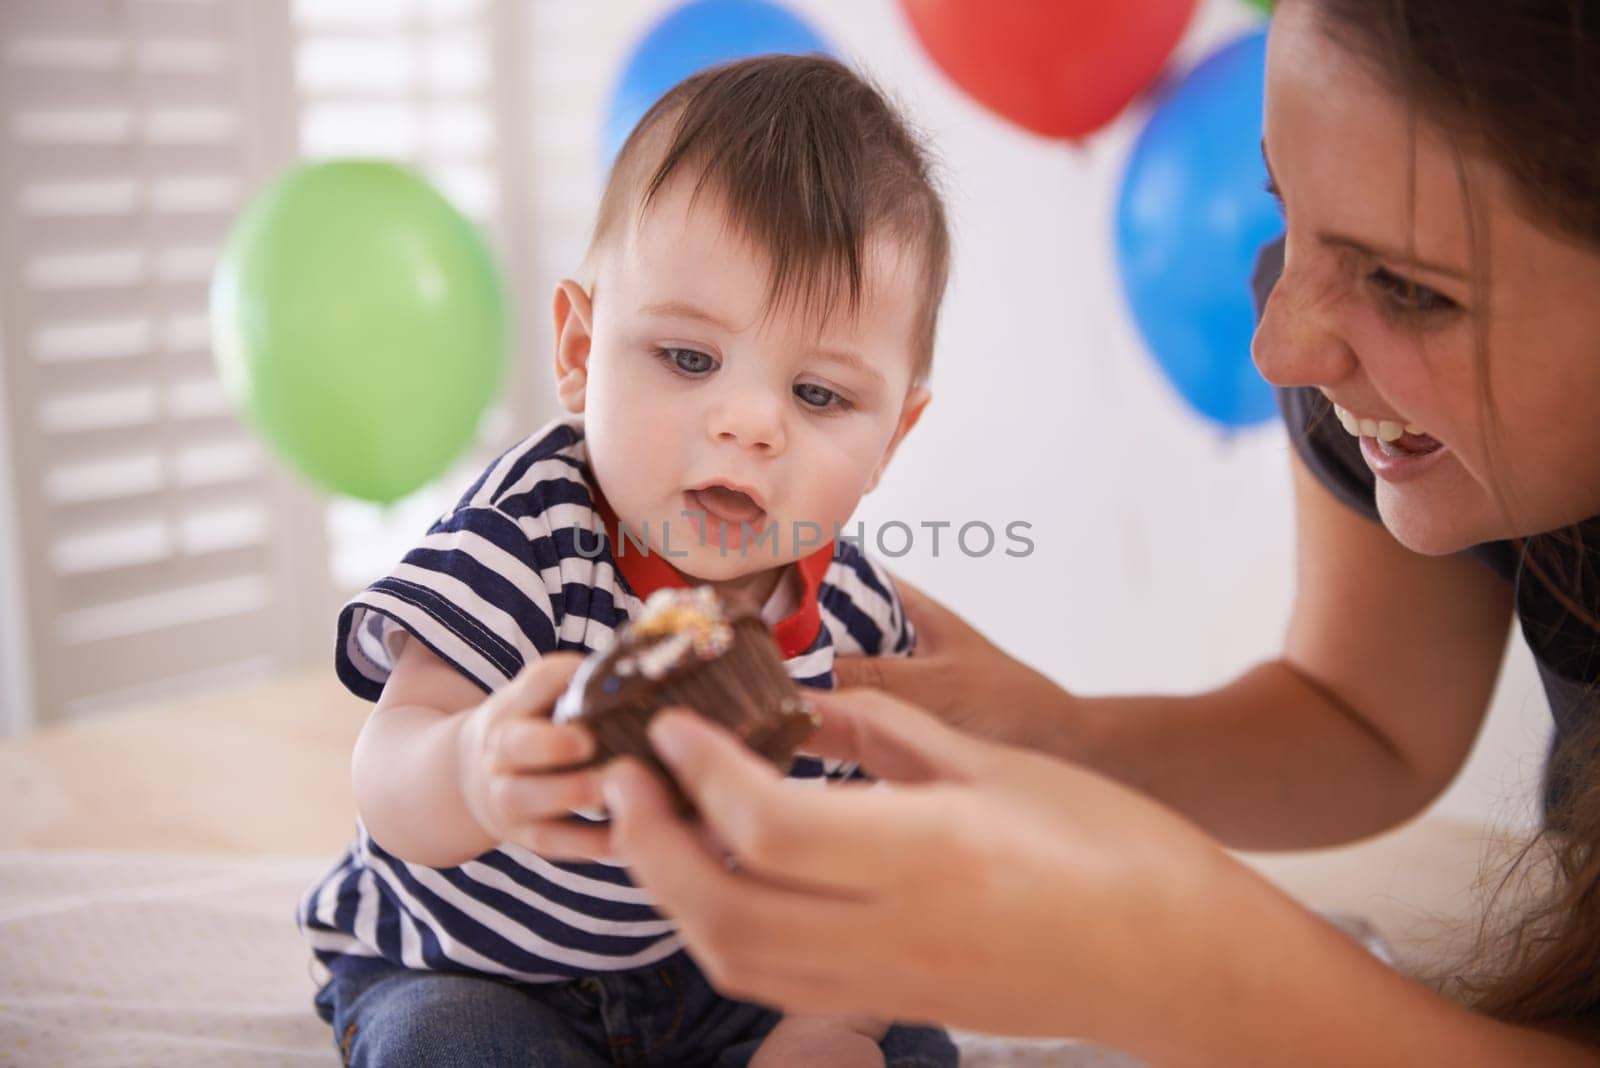 Baby, mother and birthday party with cake or balloons in home for celebration of special day, decoration or development. Child, parent and sweet dessert with accessories or event, surprise or happy.